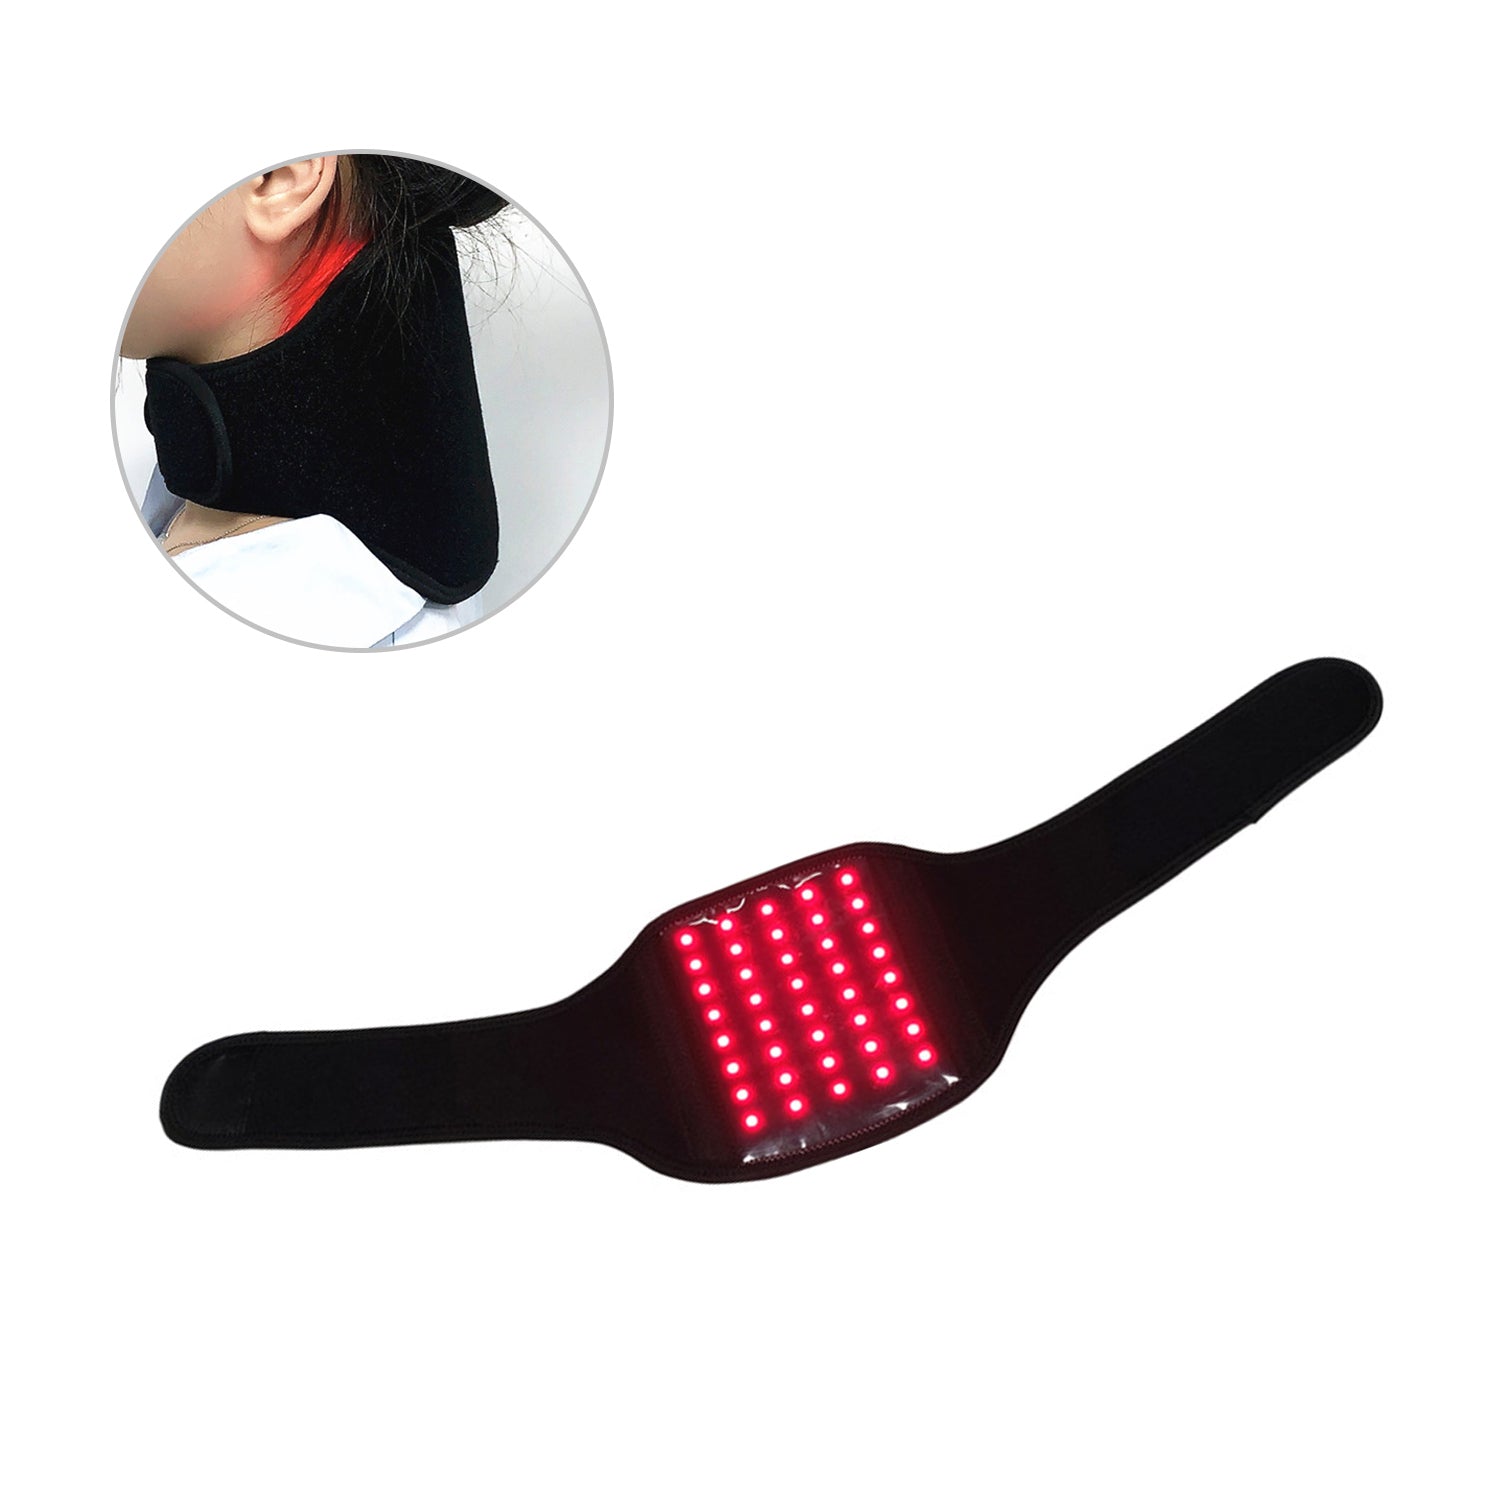 Megelin LED Red Infrared Light Therapy Belt